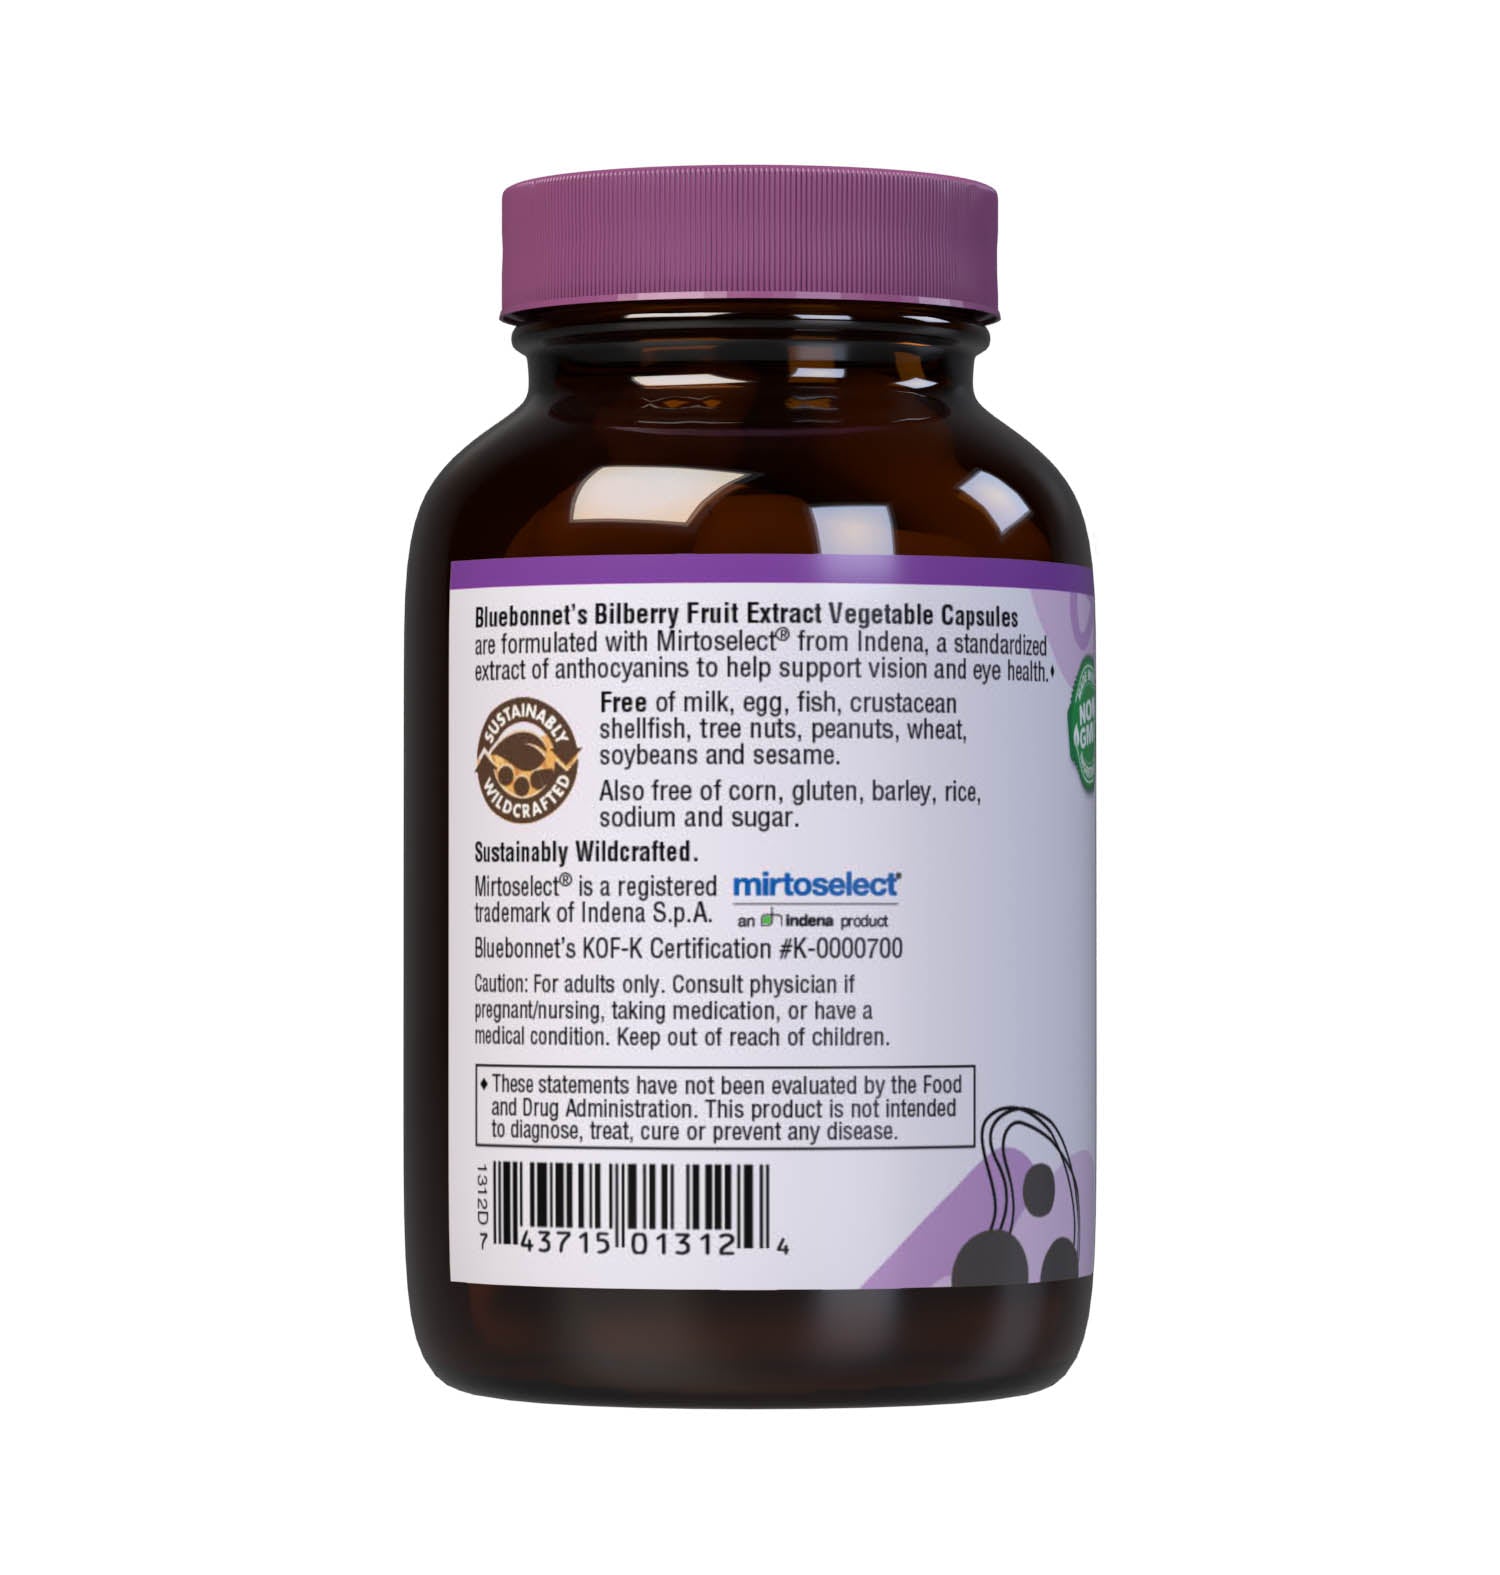 Bluebonnet’s Bilberry Fruit Extract 60 Vegetable Capsules contain Mirtoselect from Indena, a standardized extract of anthocyanins, the most researched active constituents found in bilberry fruit. A clean and gentle water-based extraction method is employed to capture and preserve bilberry’s most valuable components. Description panel. #size_60 count